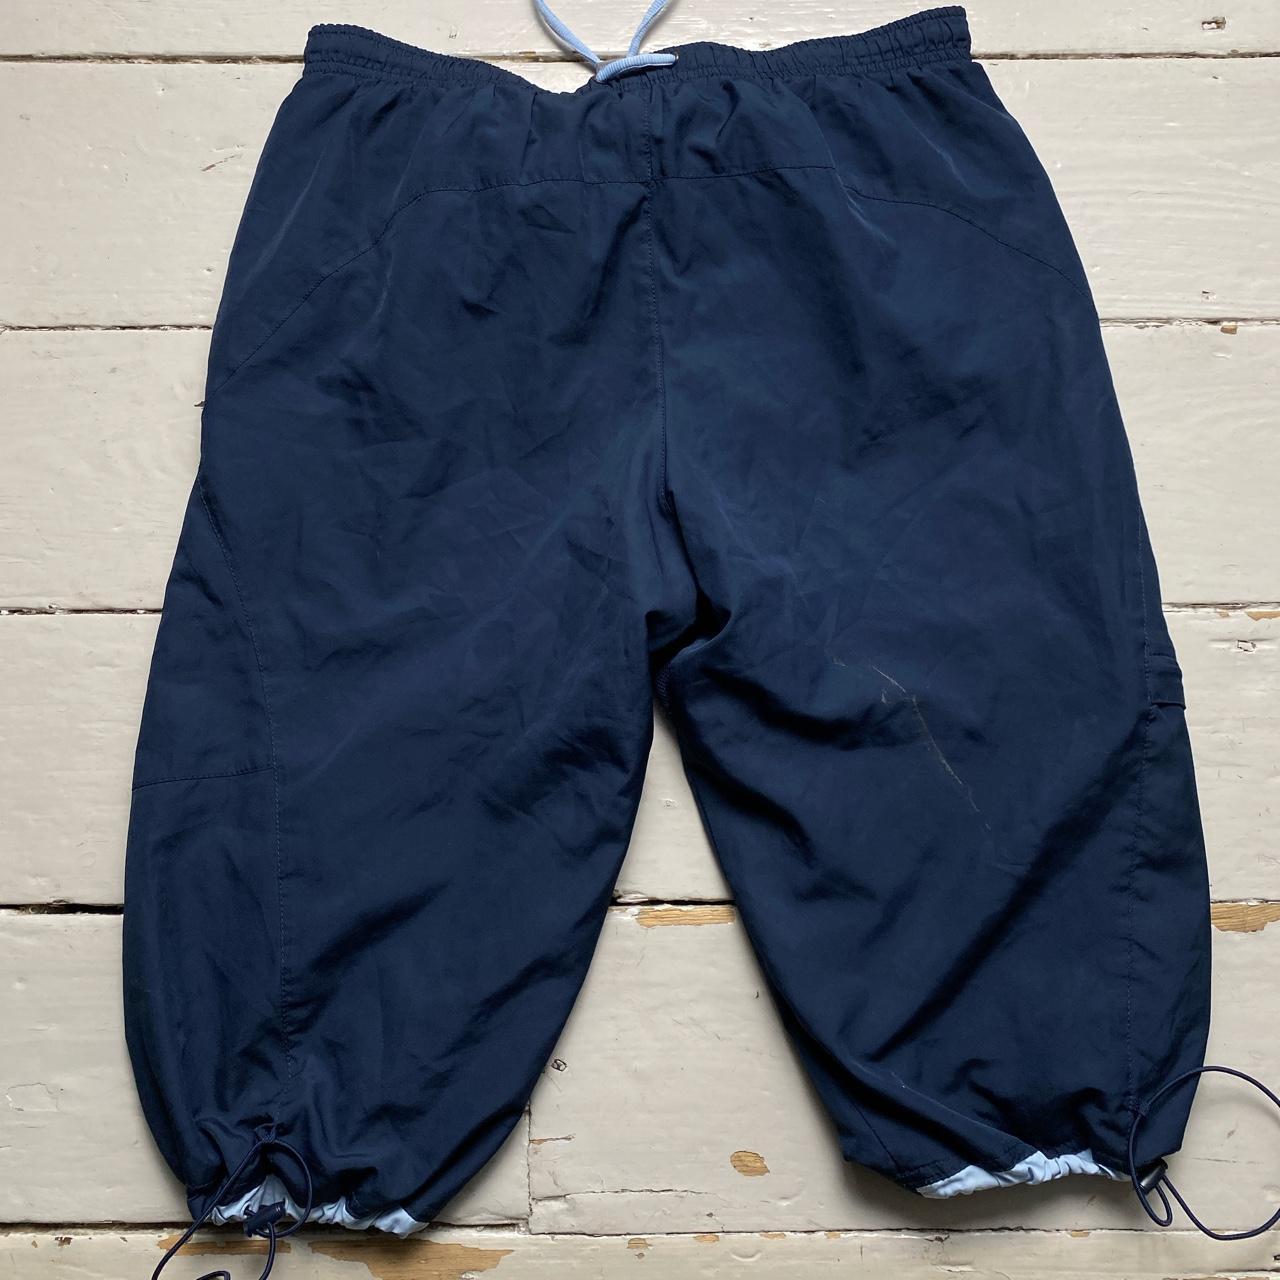 Nike Athletic Vintage Light Baby Blue and Navy Shell Trackpant Shorts